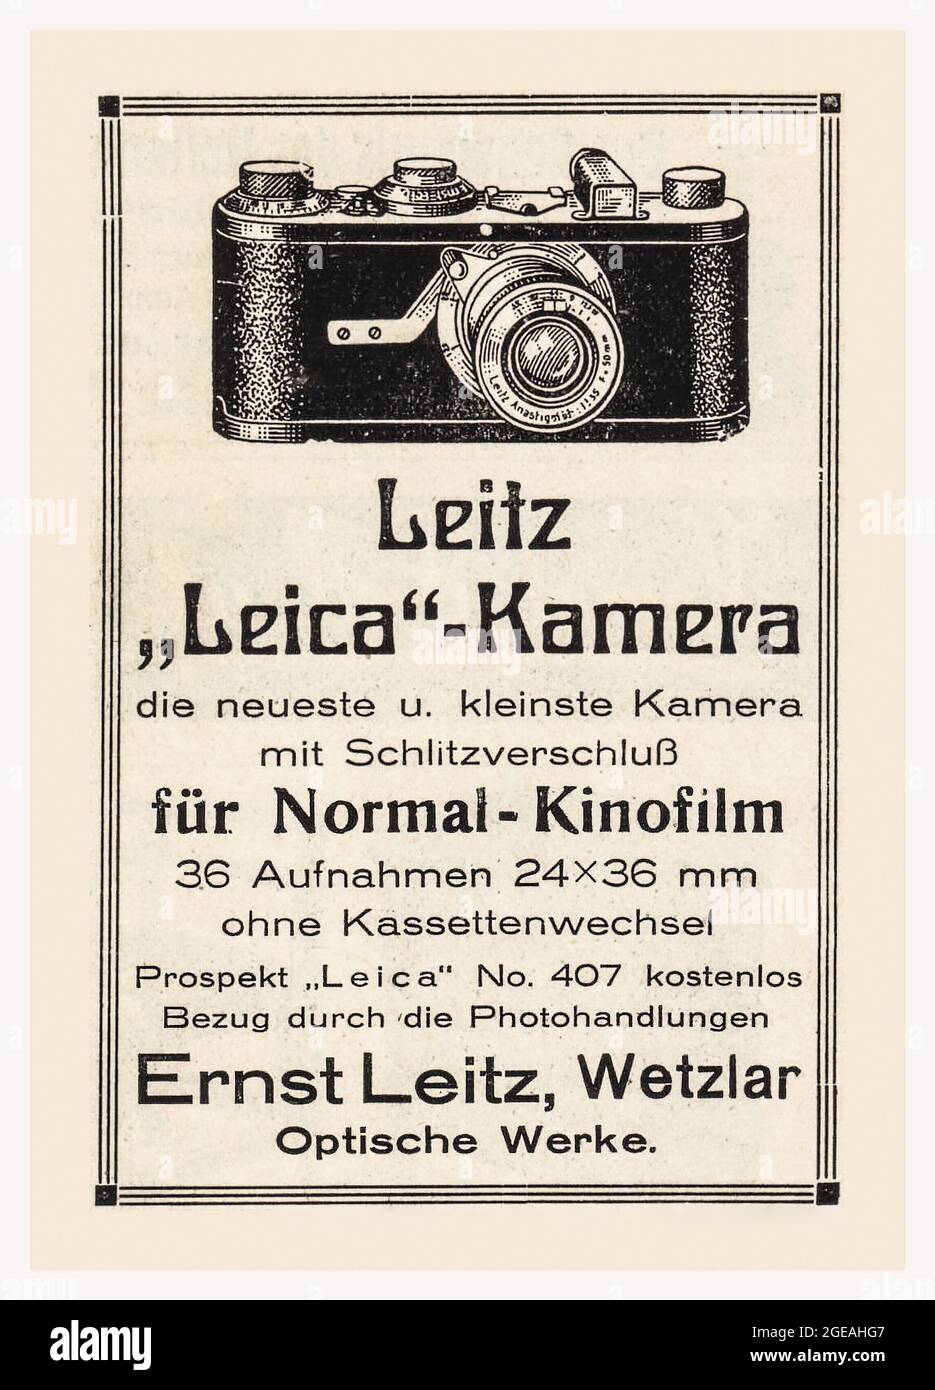 Vintage LEICA A 35mm camera press advertisement poster 1920's original revolutionary 35mm German camera made by Ernst Leitz in Wetzlar Germany. The Leitz Leica 1(A) was the first commercially available Leica 35mm camera. The Leica, designed by Oscar Barnack, was announced in 1924 and first sold to the public in 1925. The Leica was an immediate success and was responsible for popularizing 35mm film photography. 'prospectus leica no 407 available free of charge from photo dealers' Ernst Leitz Wetzlar Optical Works Stock Photo